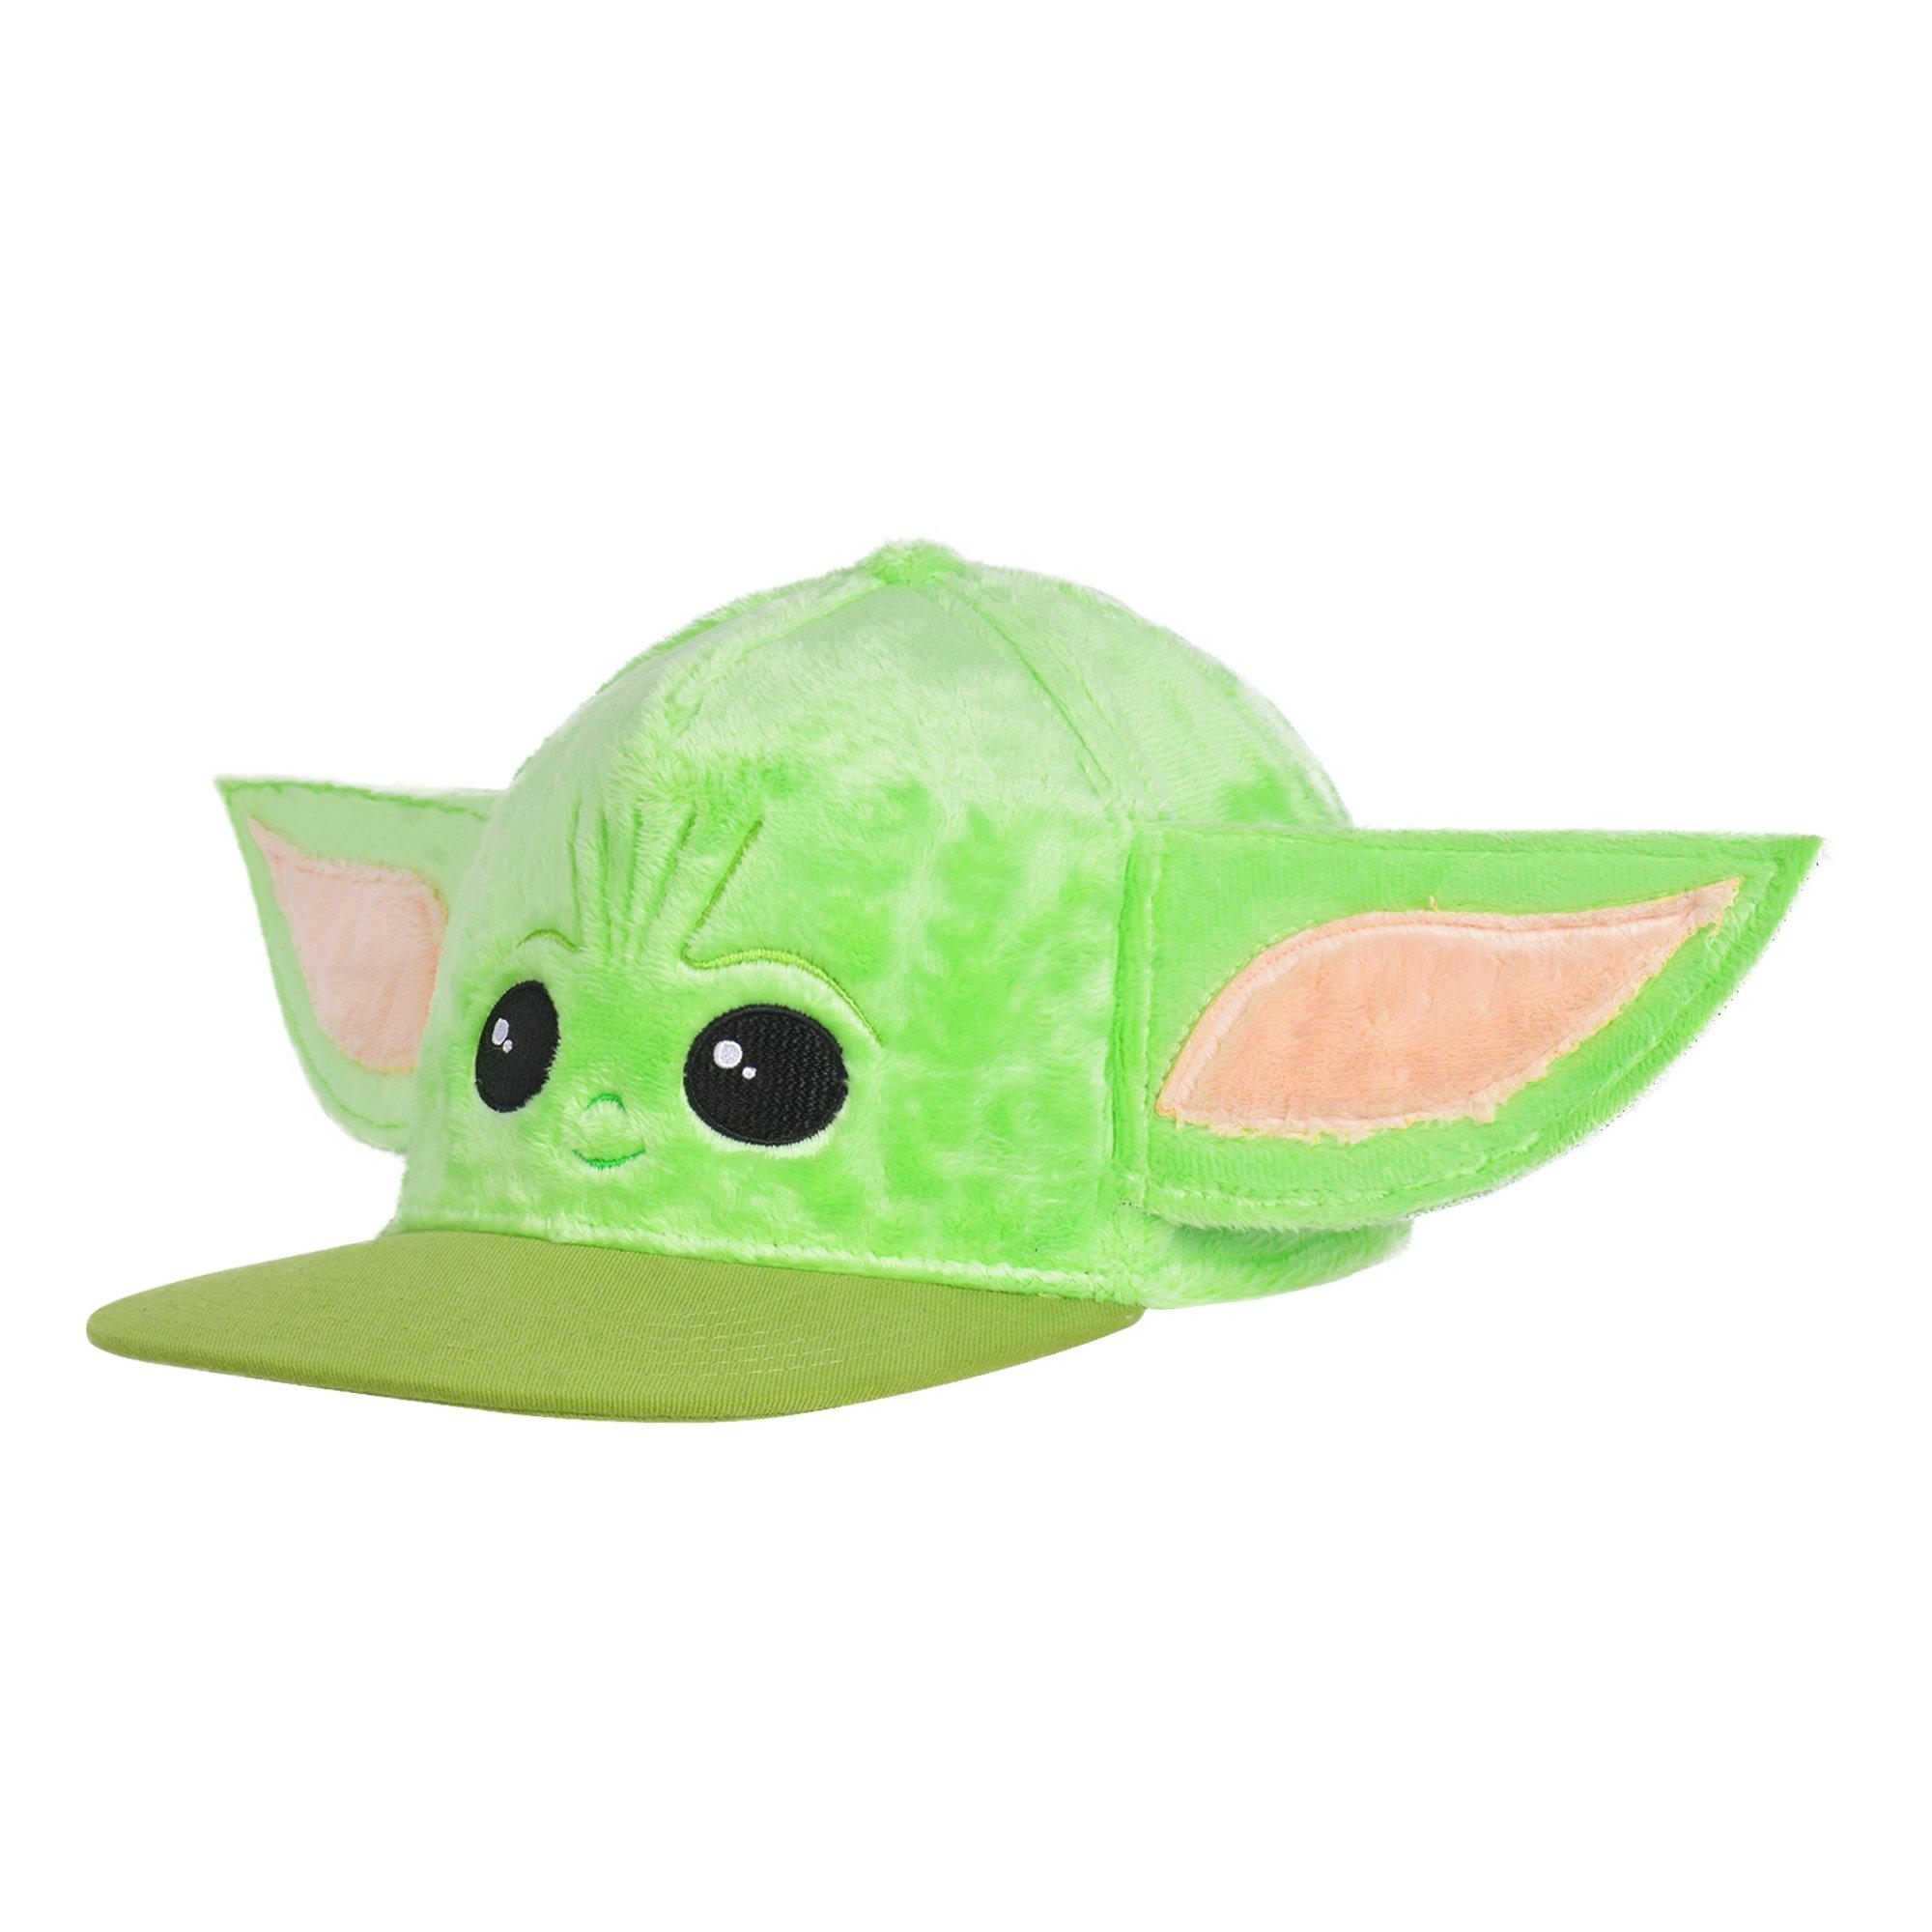 Star Wars: The Mandalorian Grogu Plush Hat with Ears, Concept One